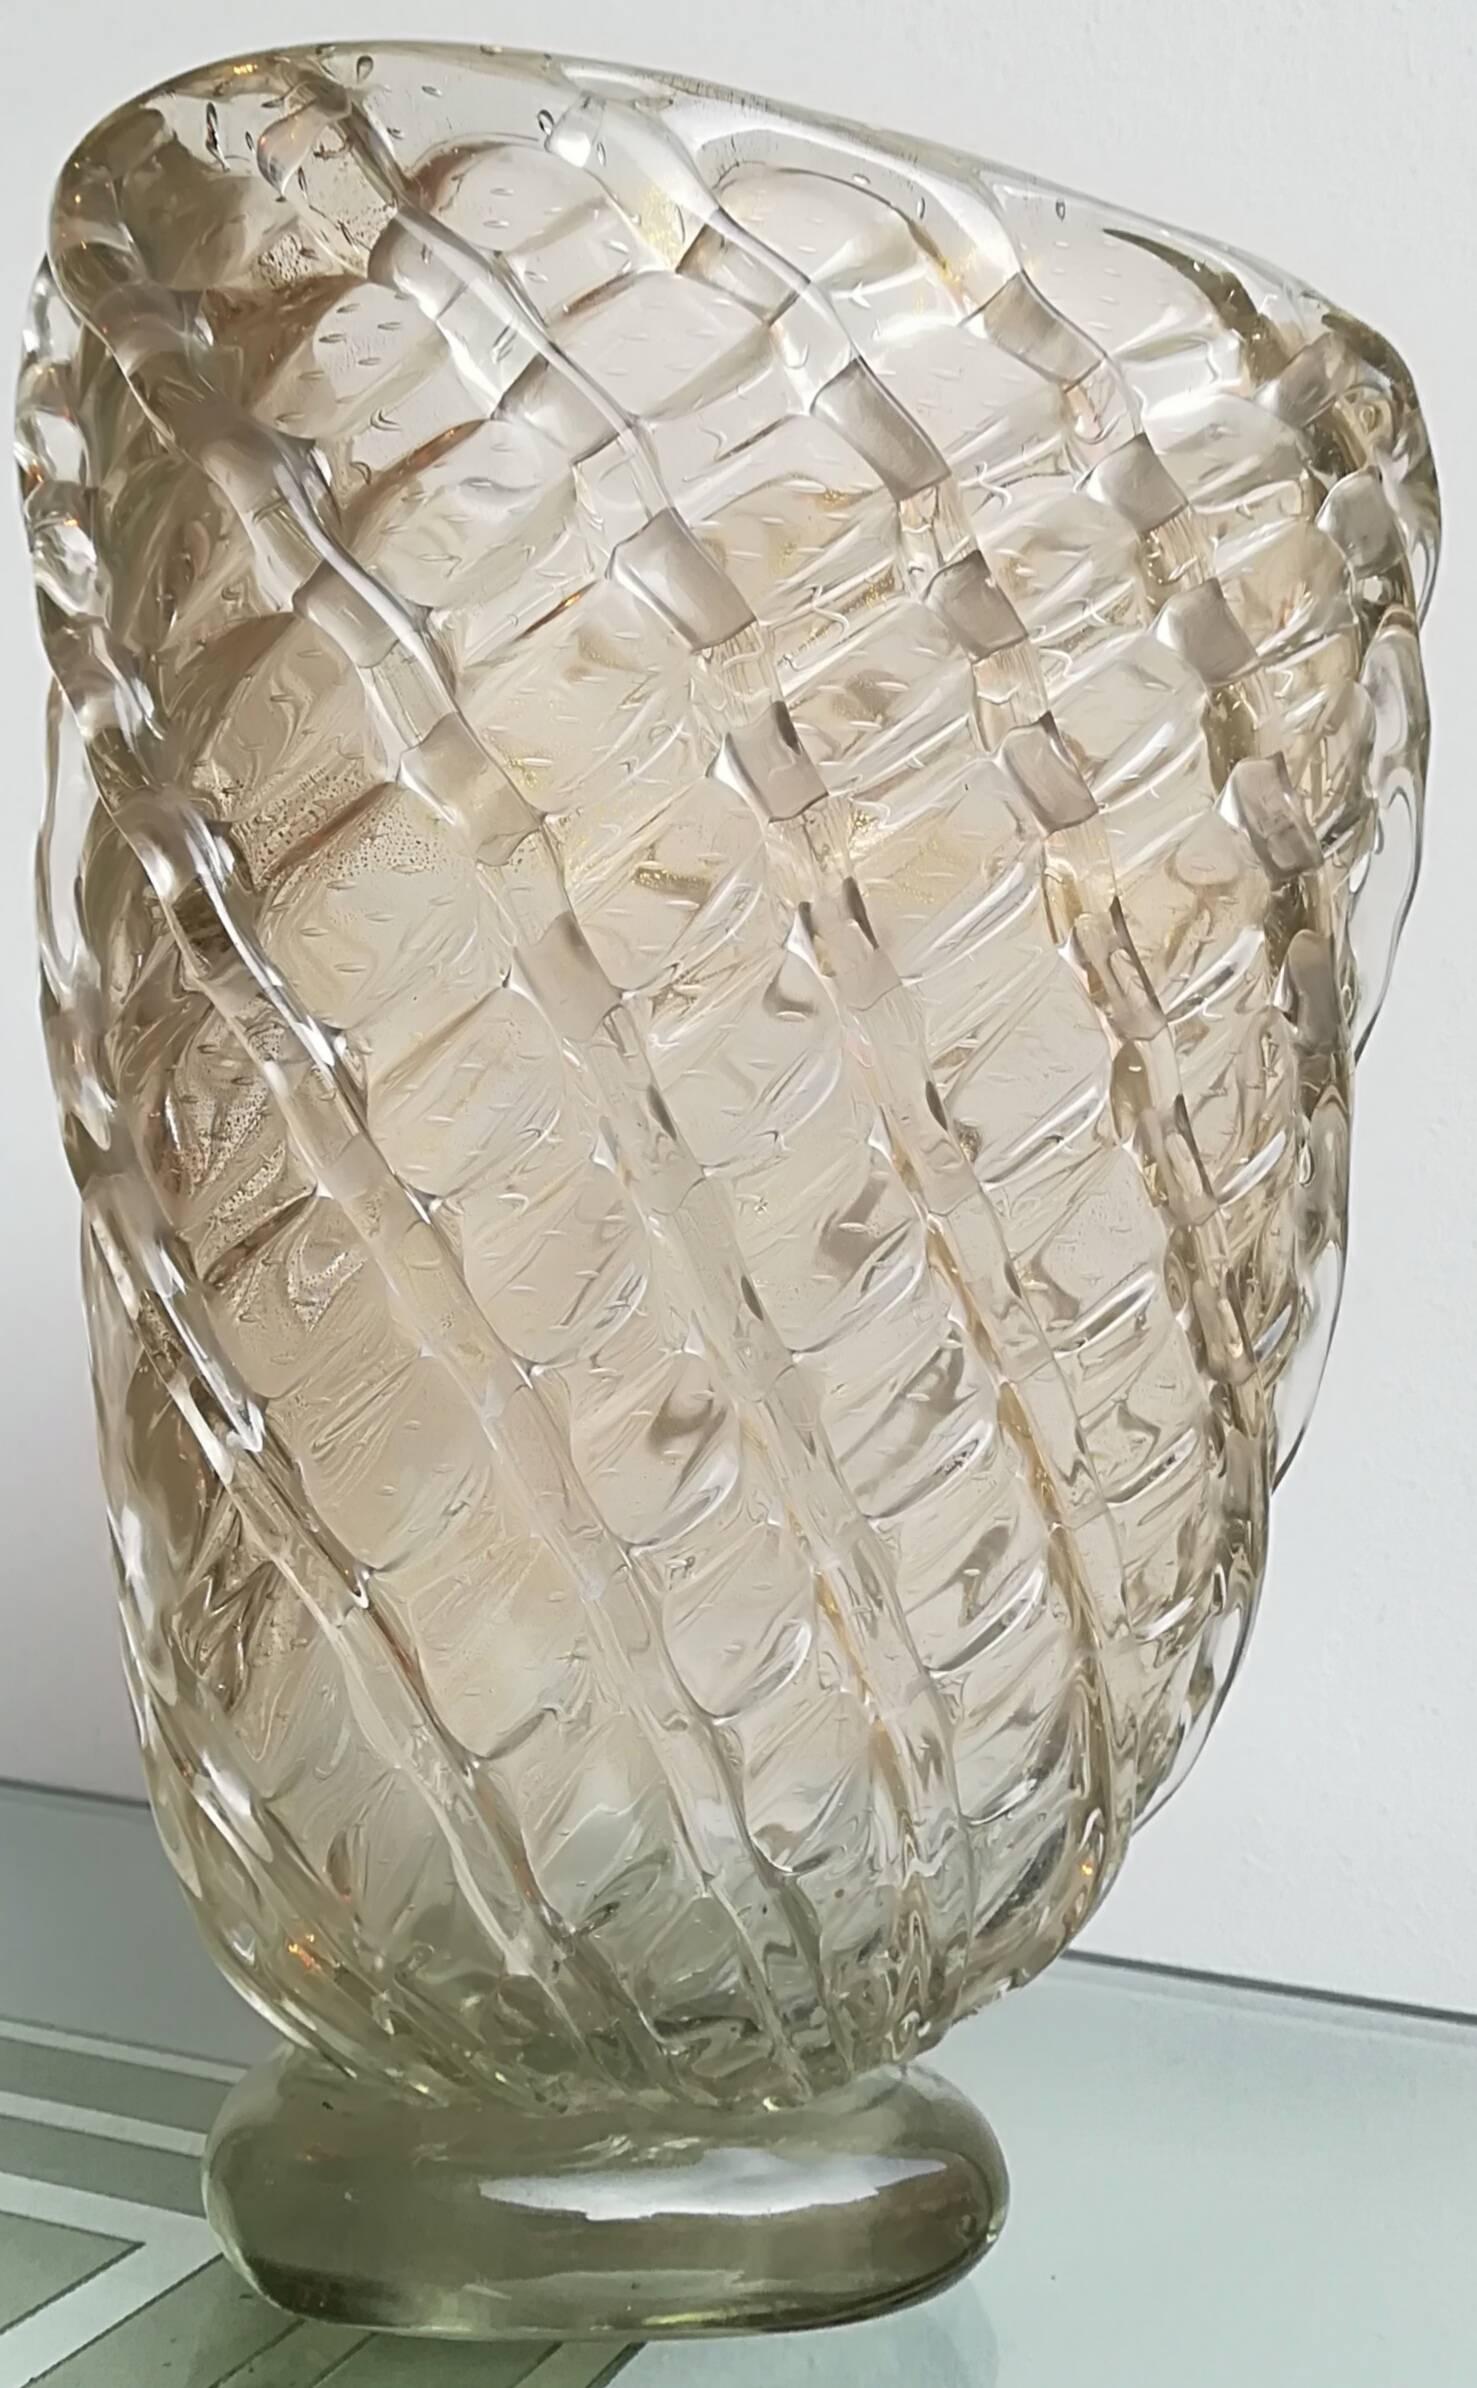 Vase Barovier Murano glass 1940, worked with gold leaf. Iridescent.